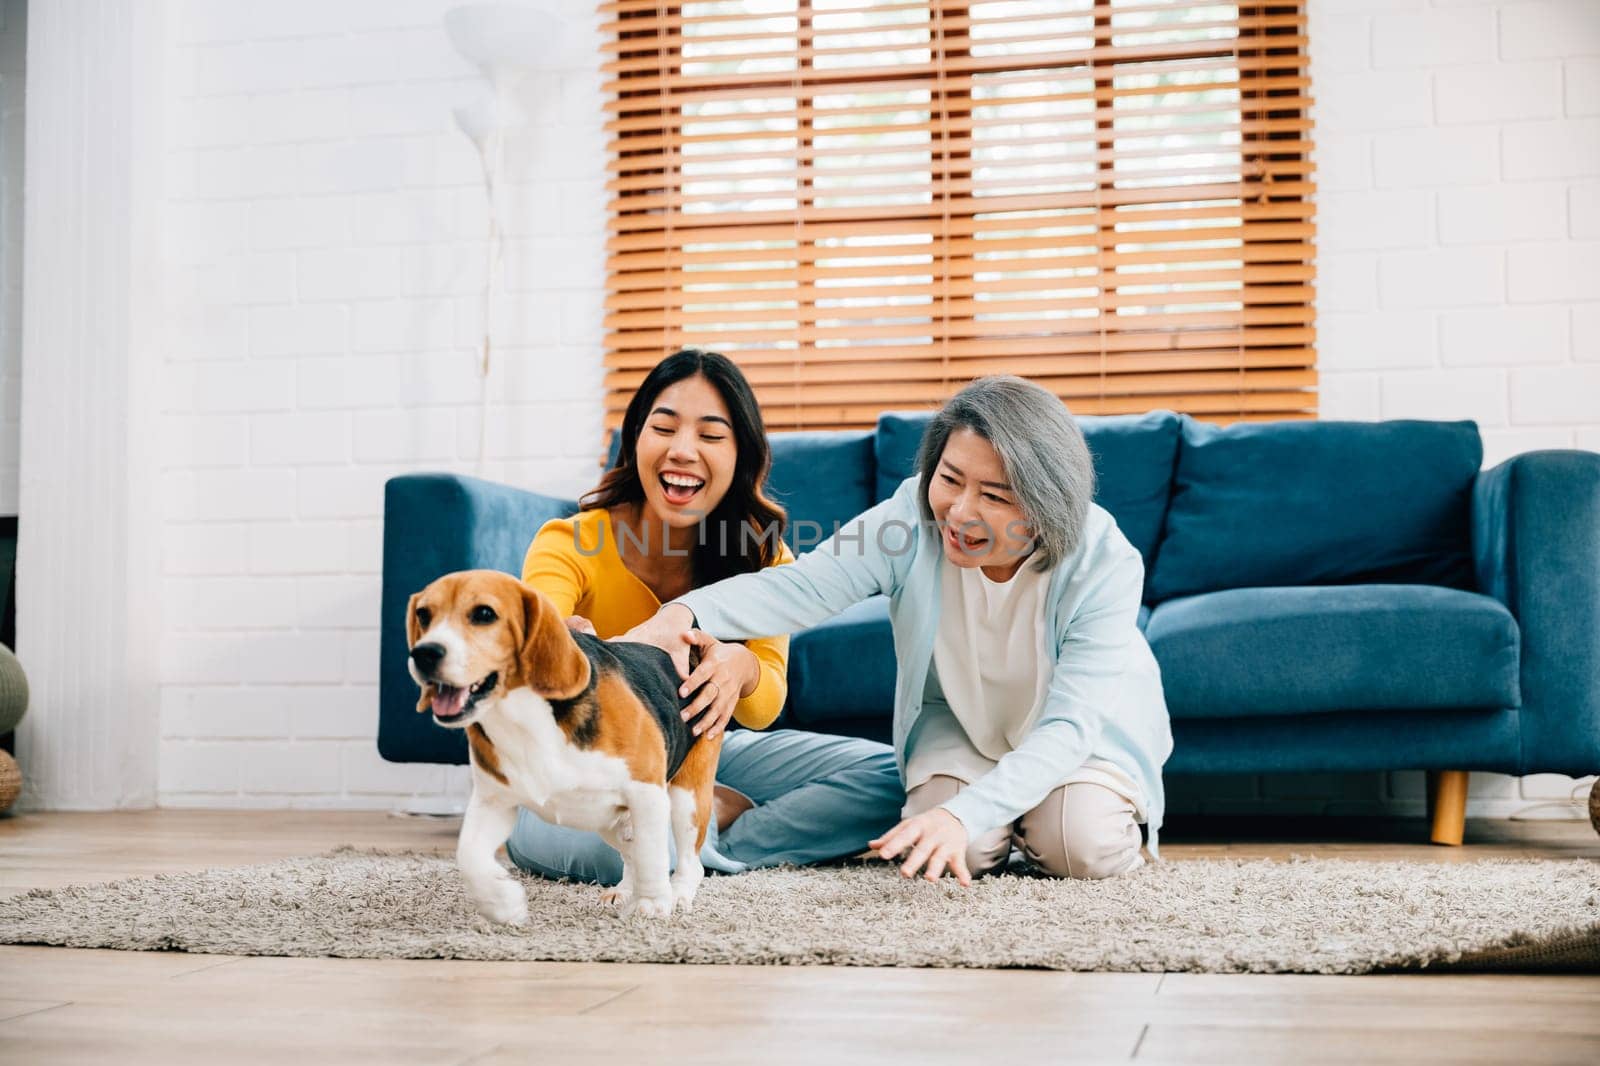 Weekend leisure activity at home, A woman and her mother share glad moments with their Beagle dog, running together in the living room. Their friendship is heartwarming. pet love by Sorapop